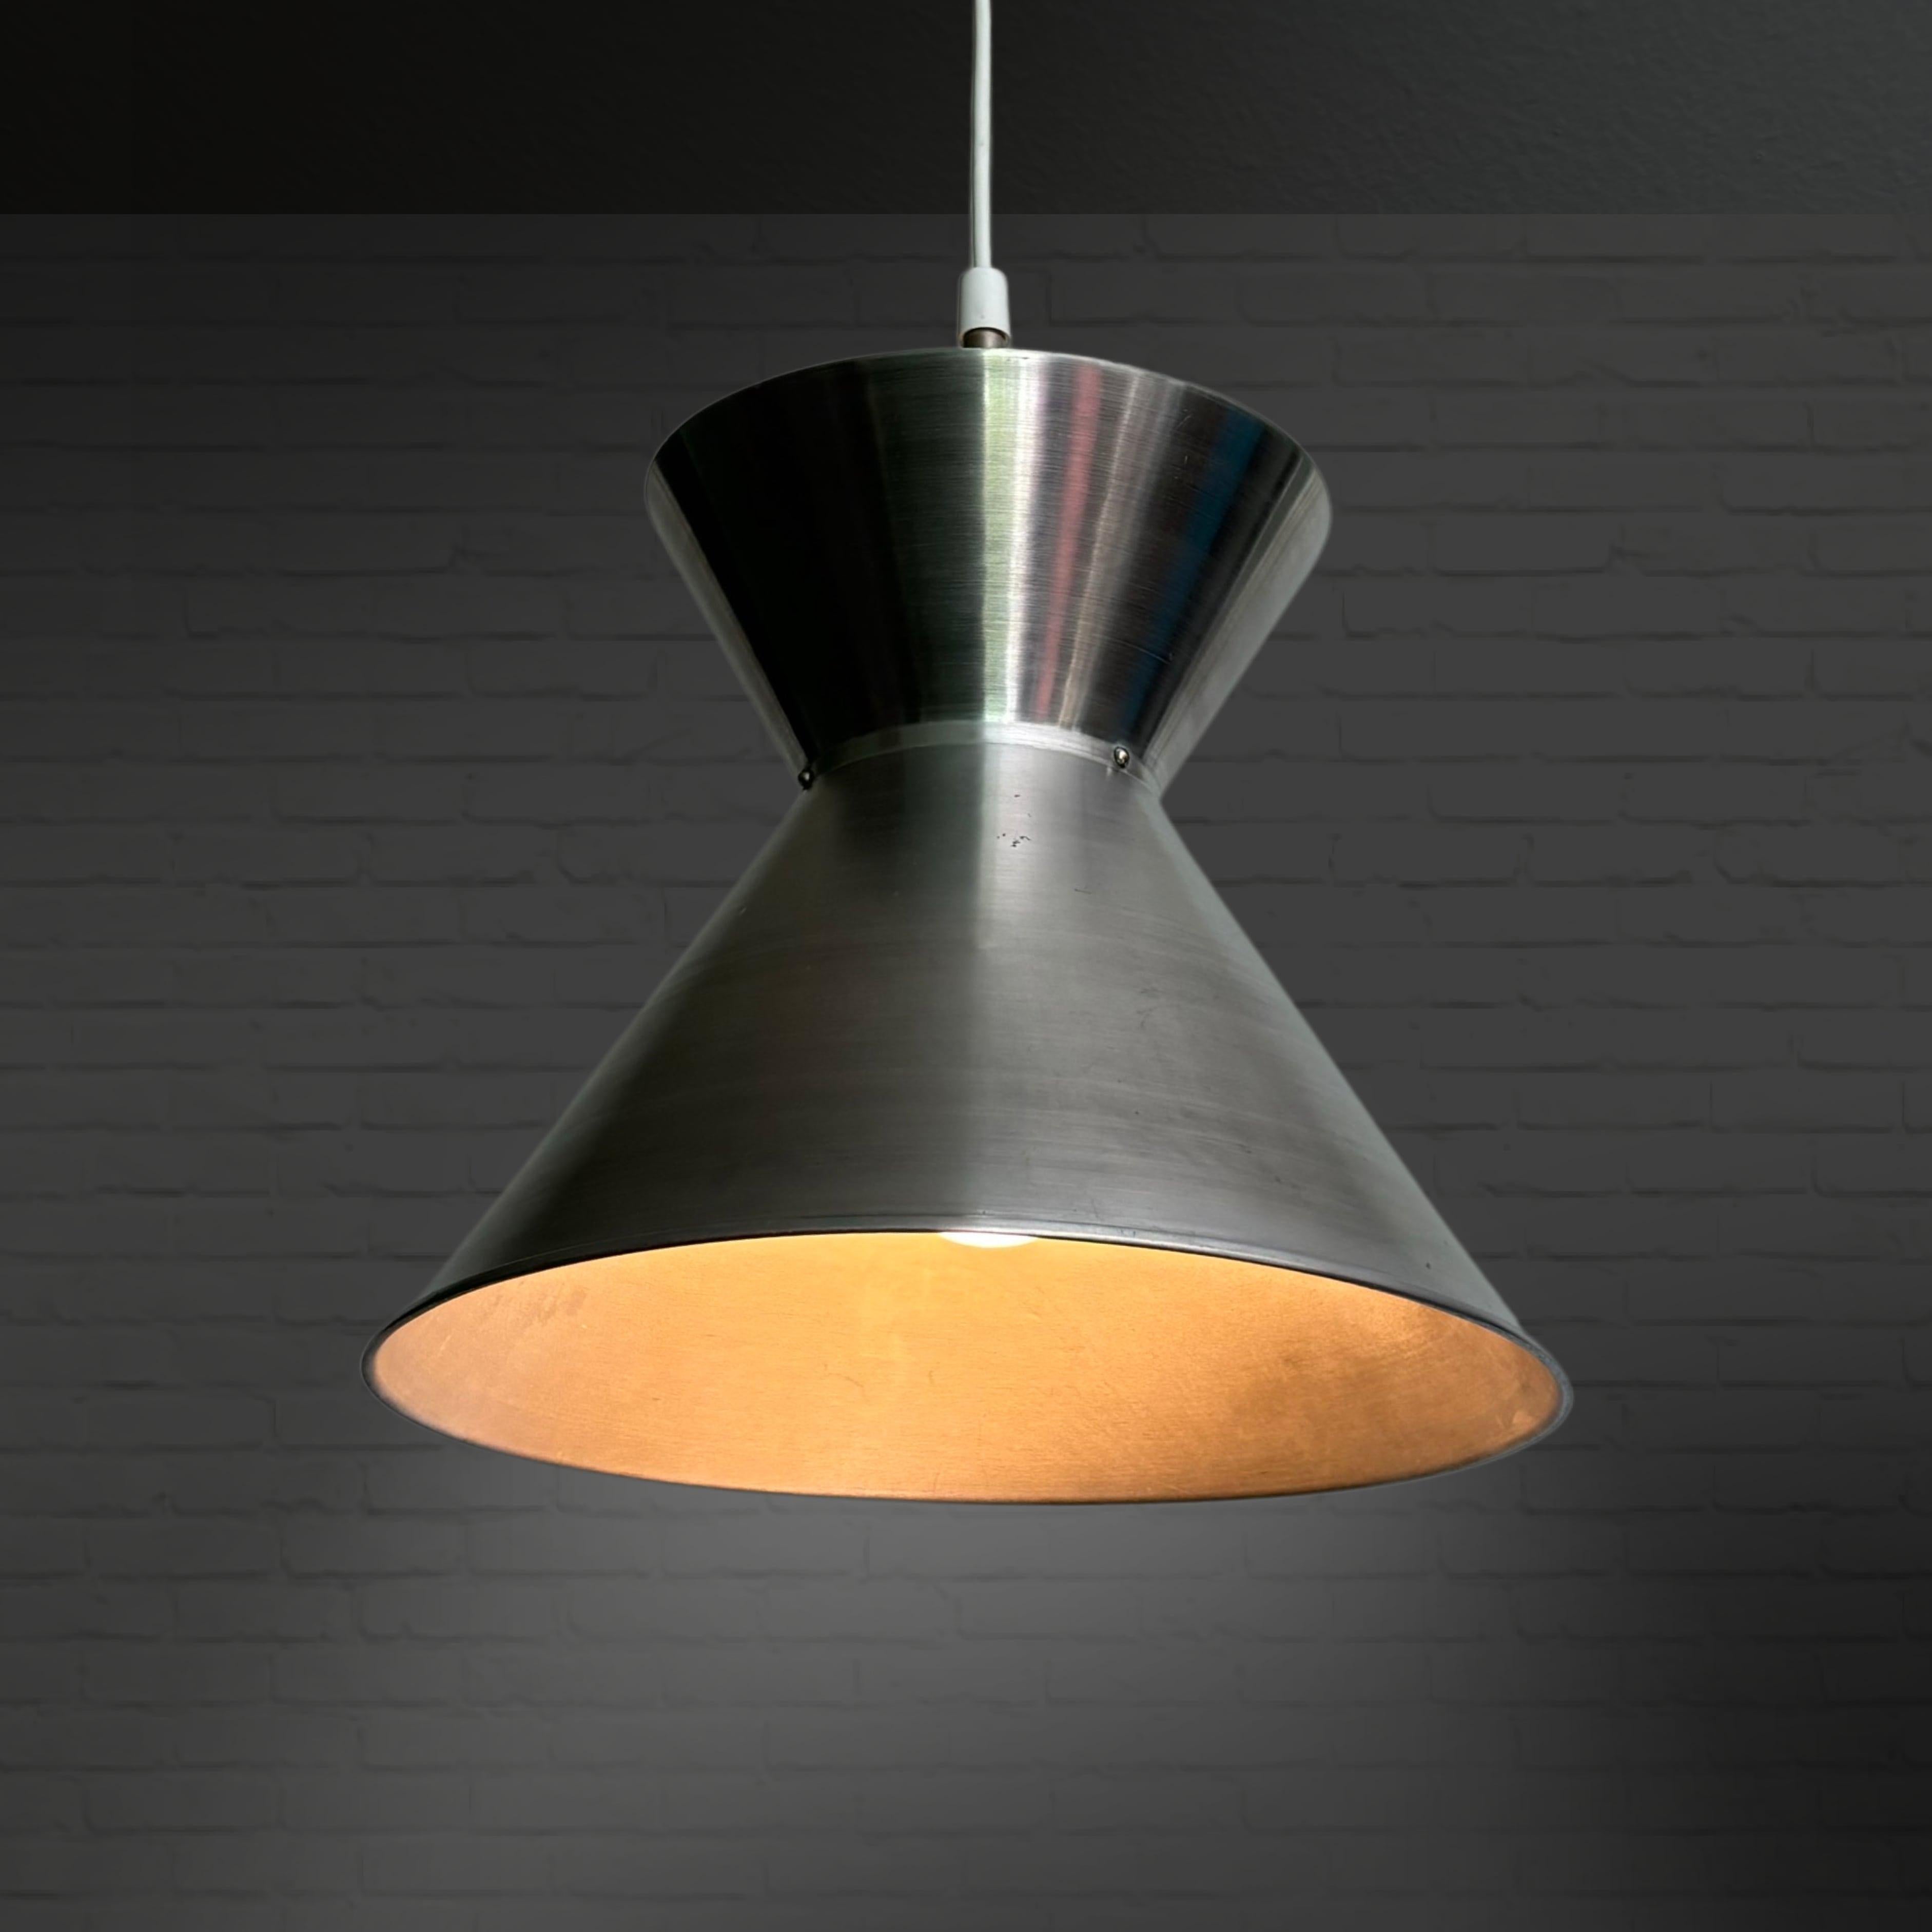 A double cone Laboratory pendant lamp model 16453 designed by the Danish architect Mogens Koch for Louis Poulsen. Specifically designed in the late 1950s to be used at the Royal Veterinary and Agricultural University in Copenhagen. Initially